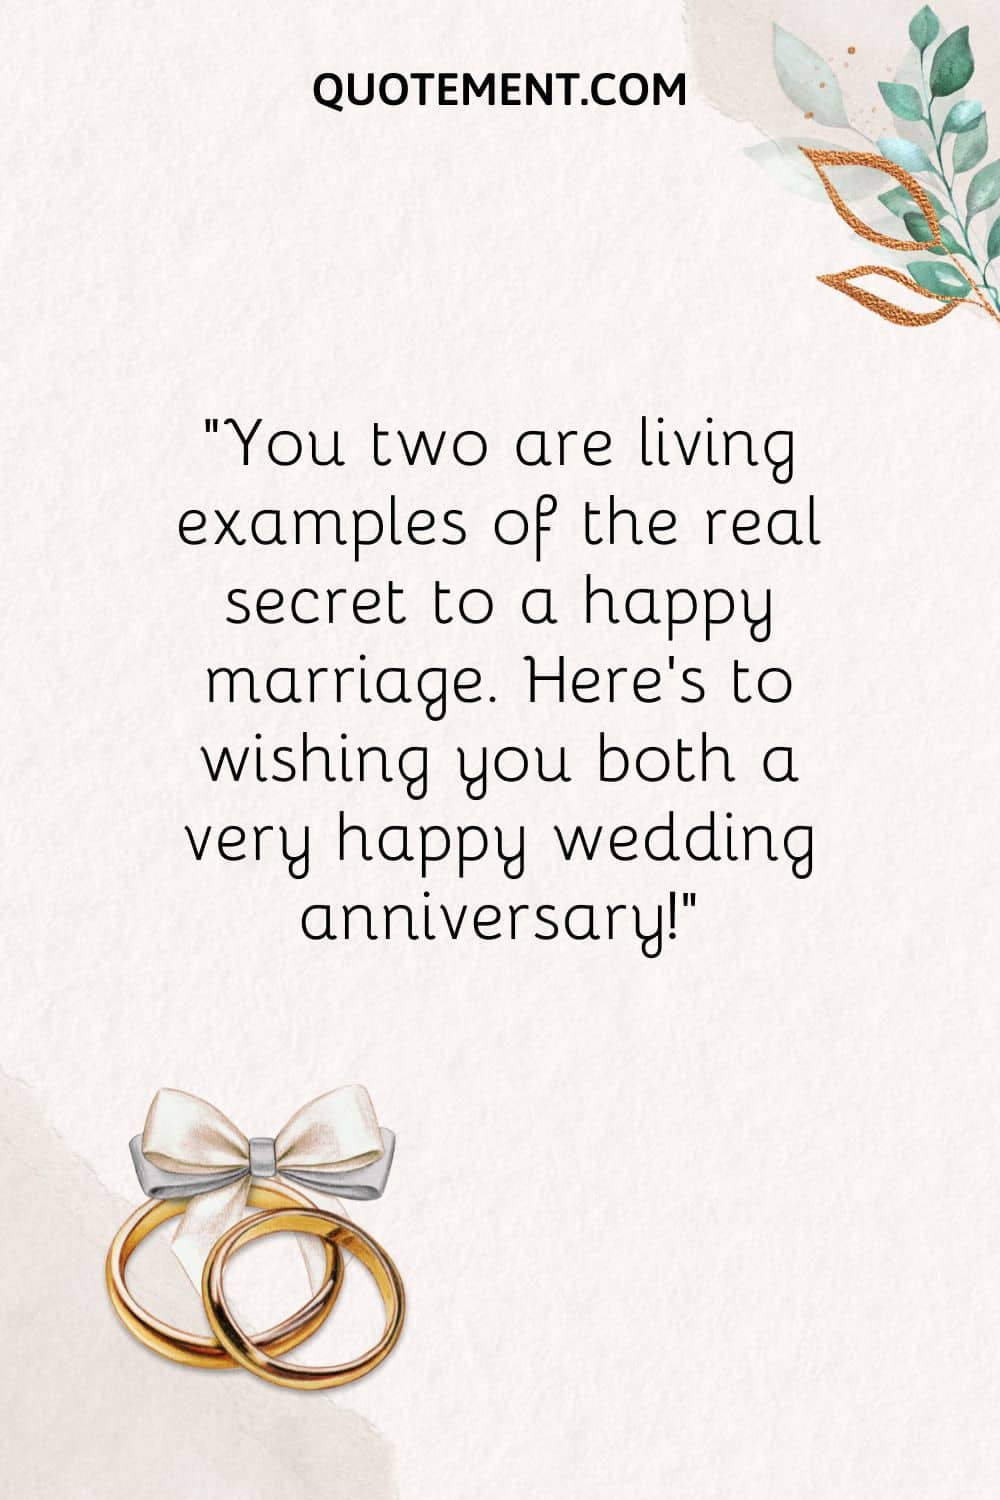 You two are living examples of the real secret to a happy marriage